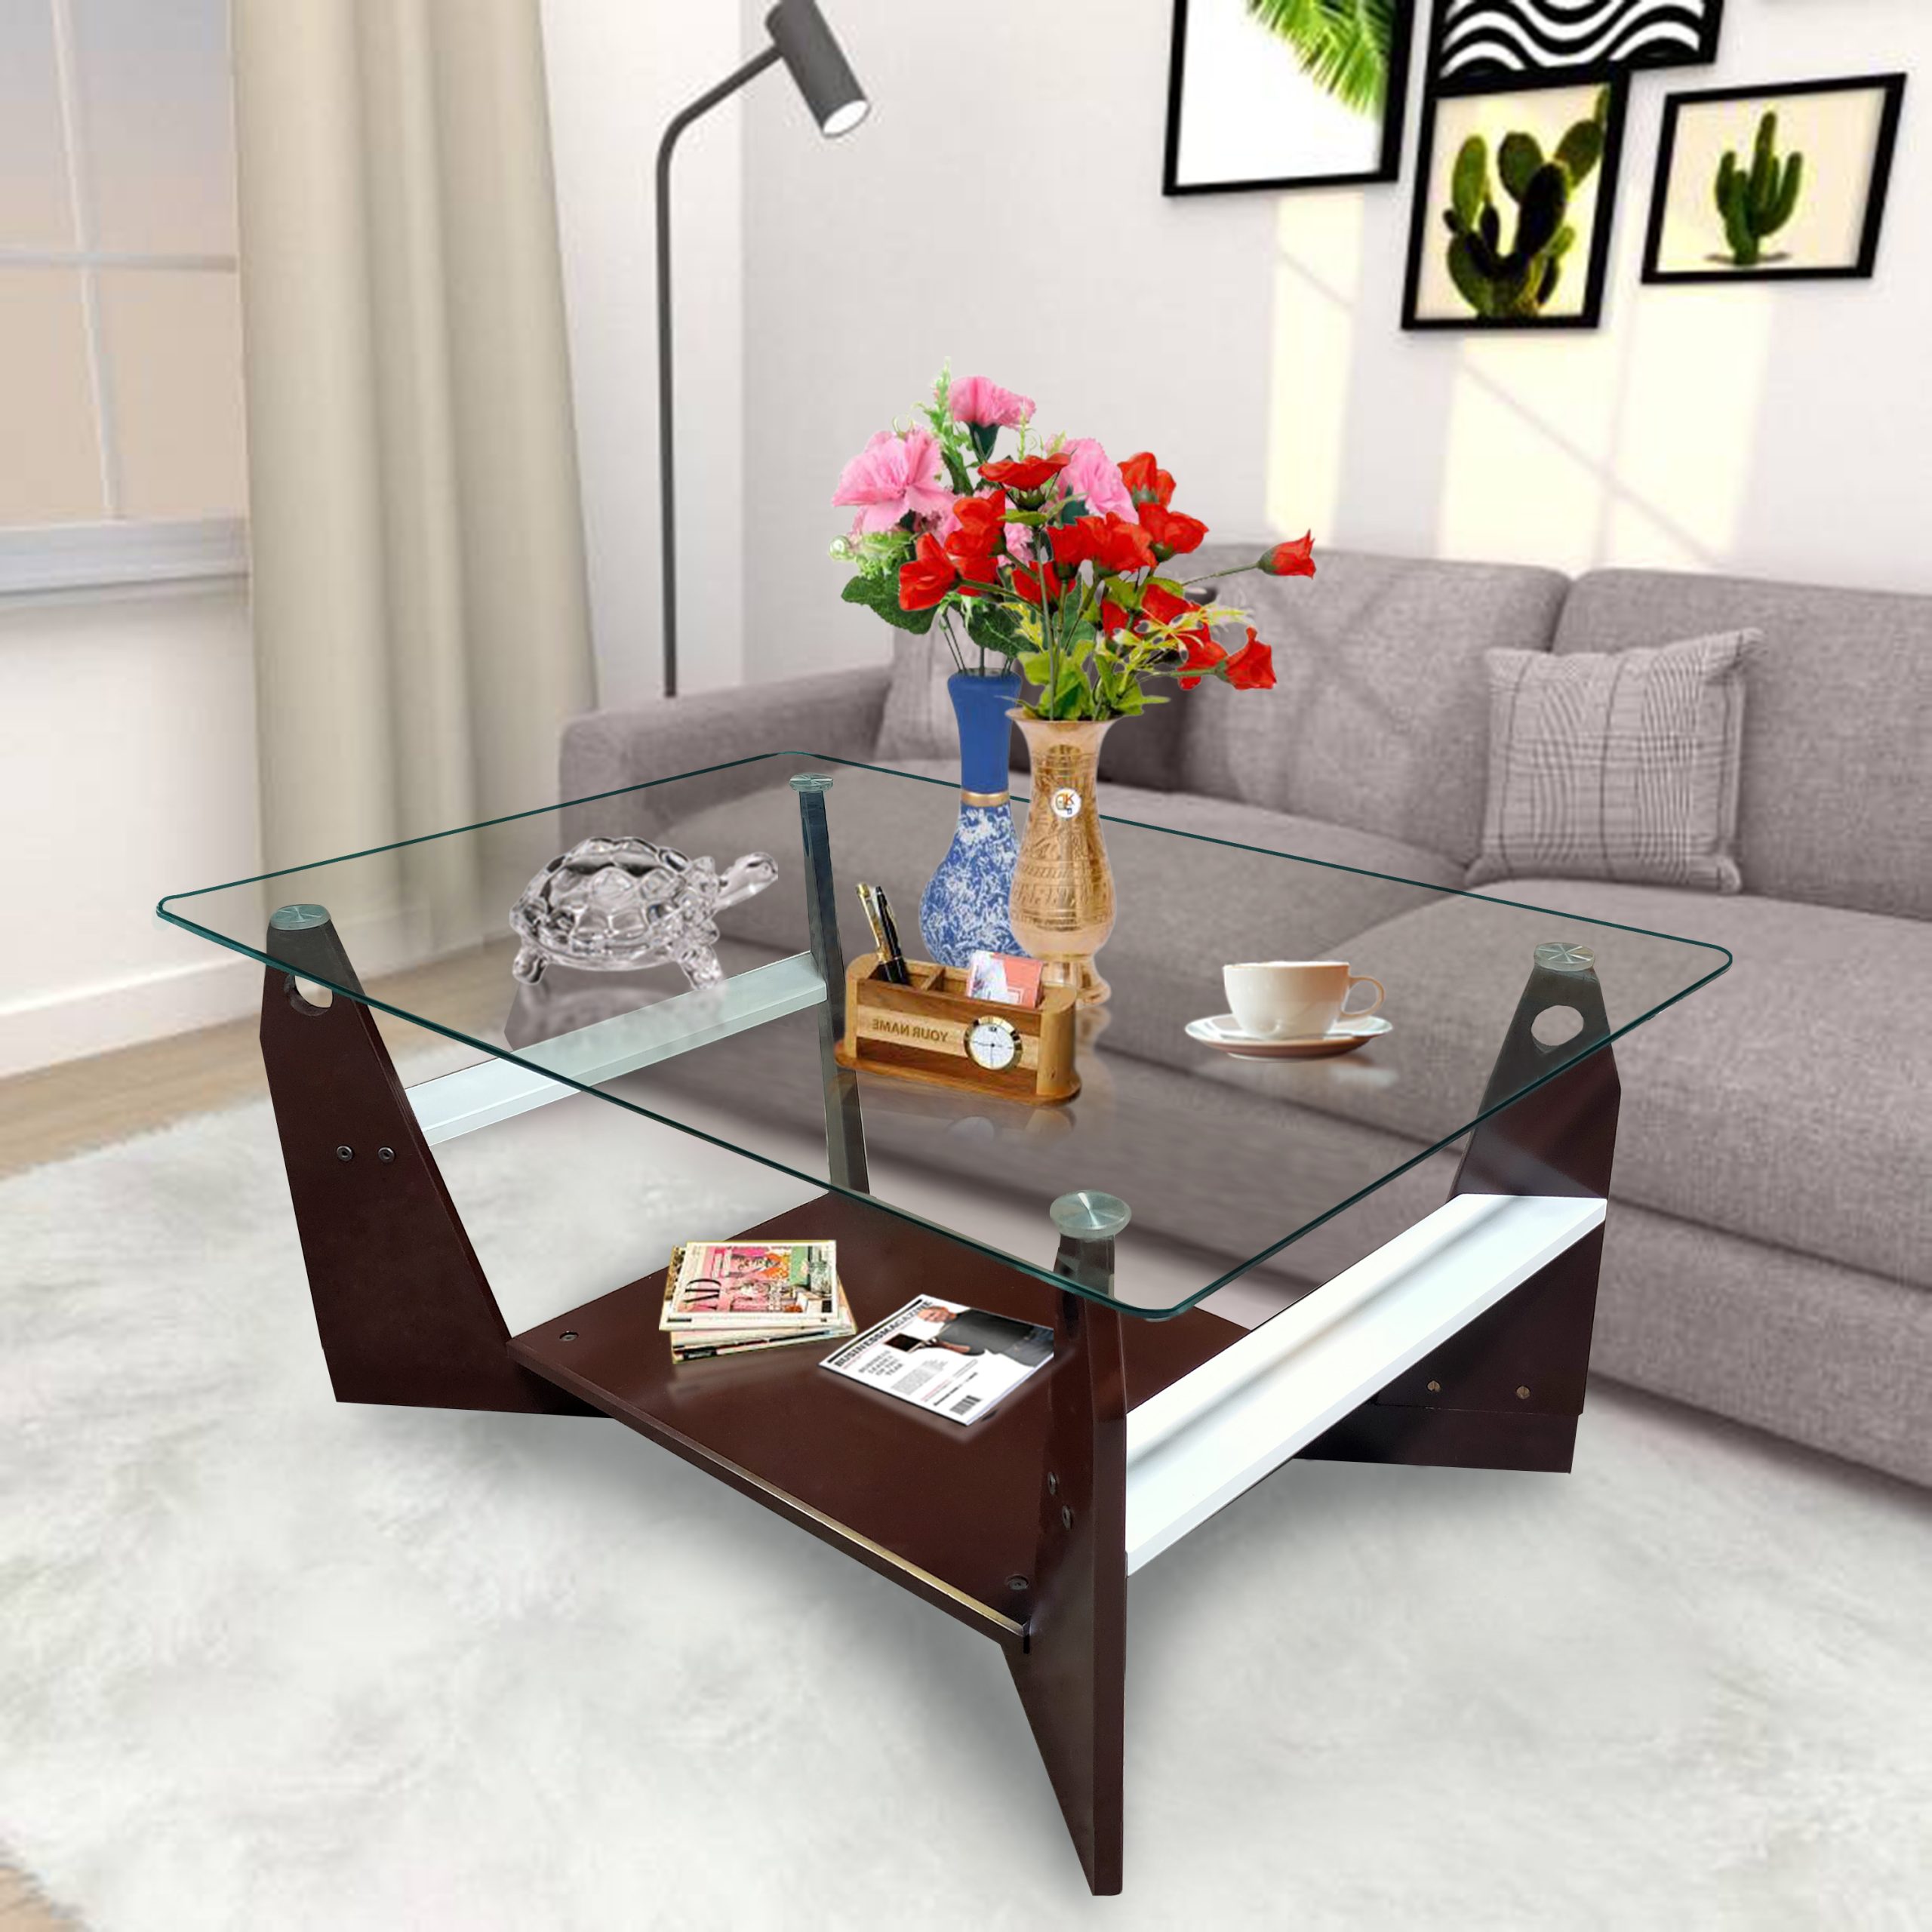 Product Category Tables | Covethouse | Centre table living room, Centre table  design, Table decor living room